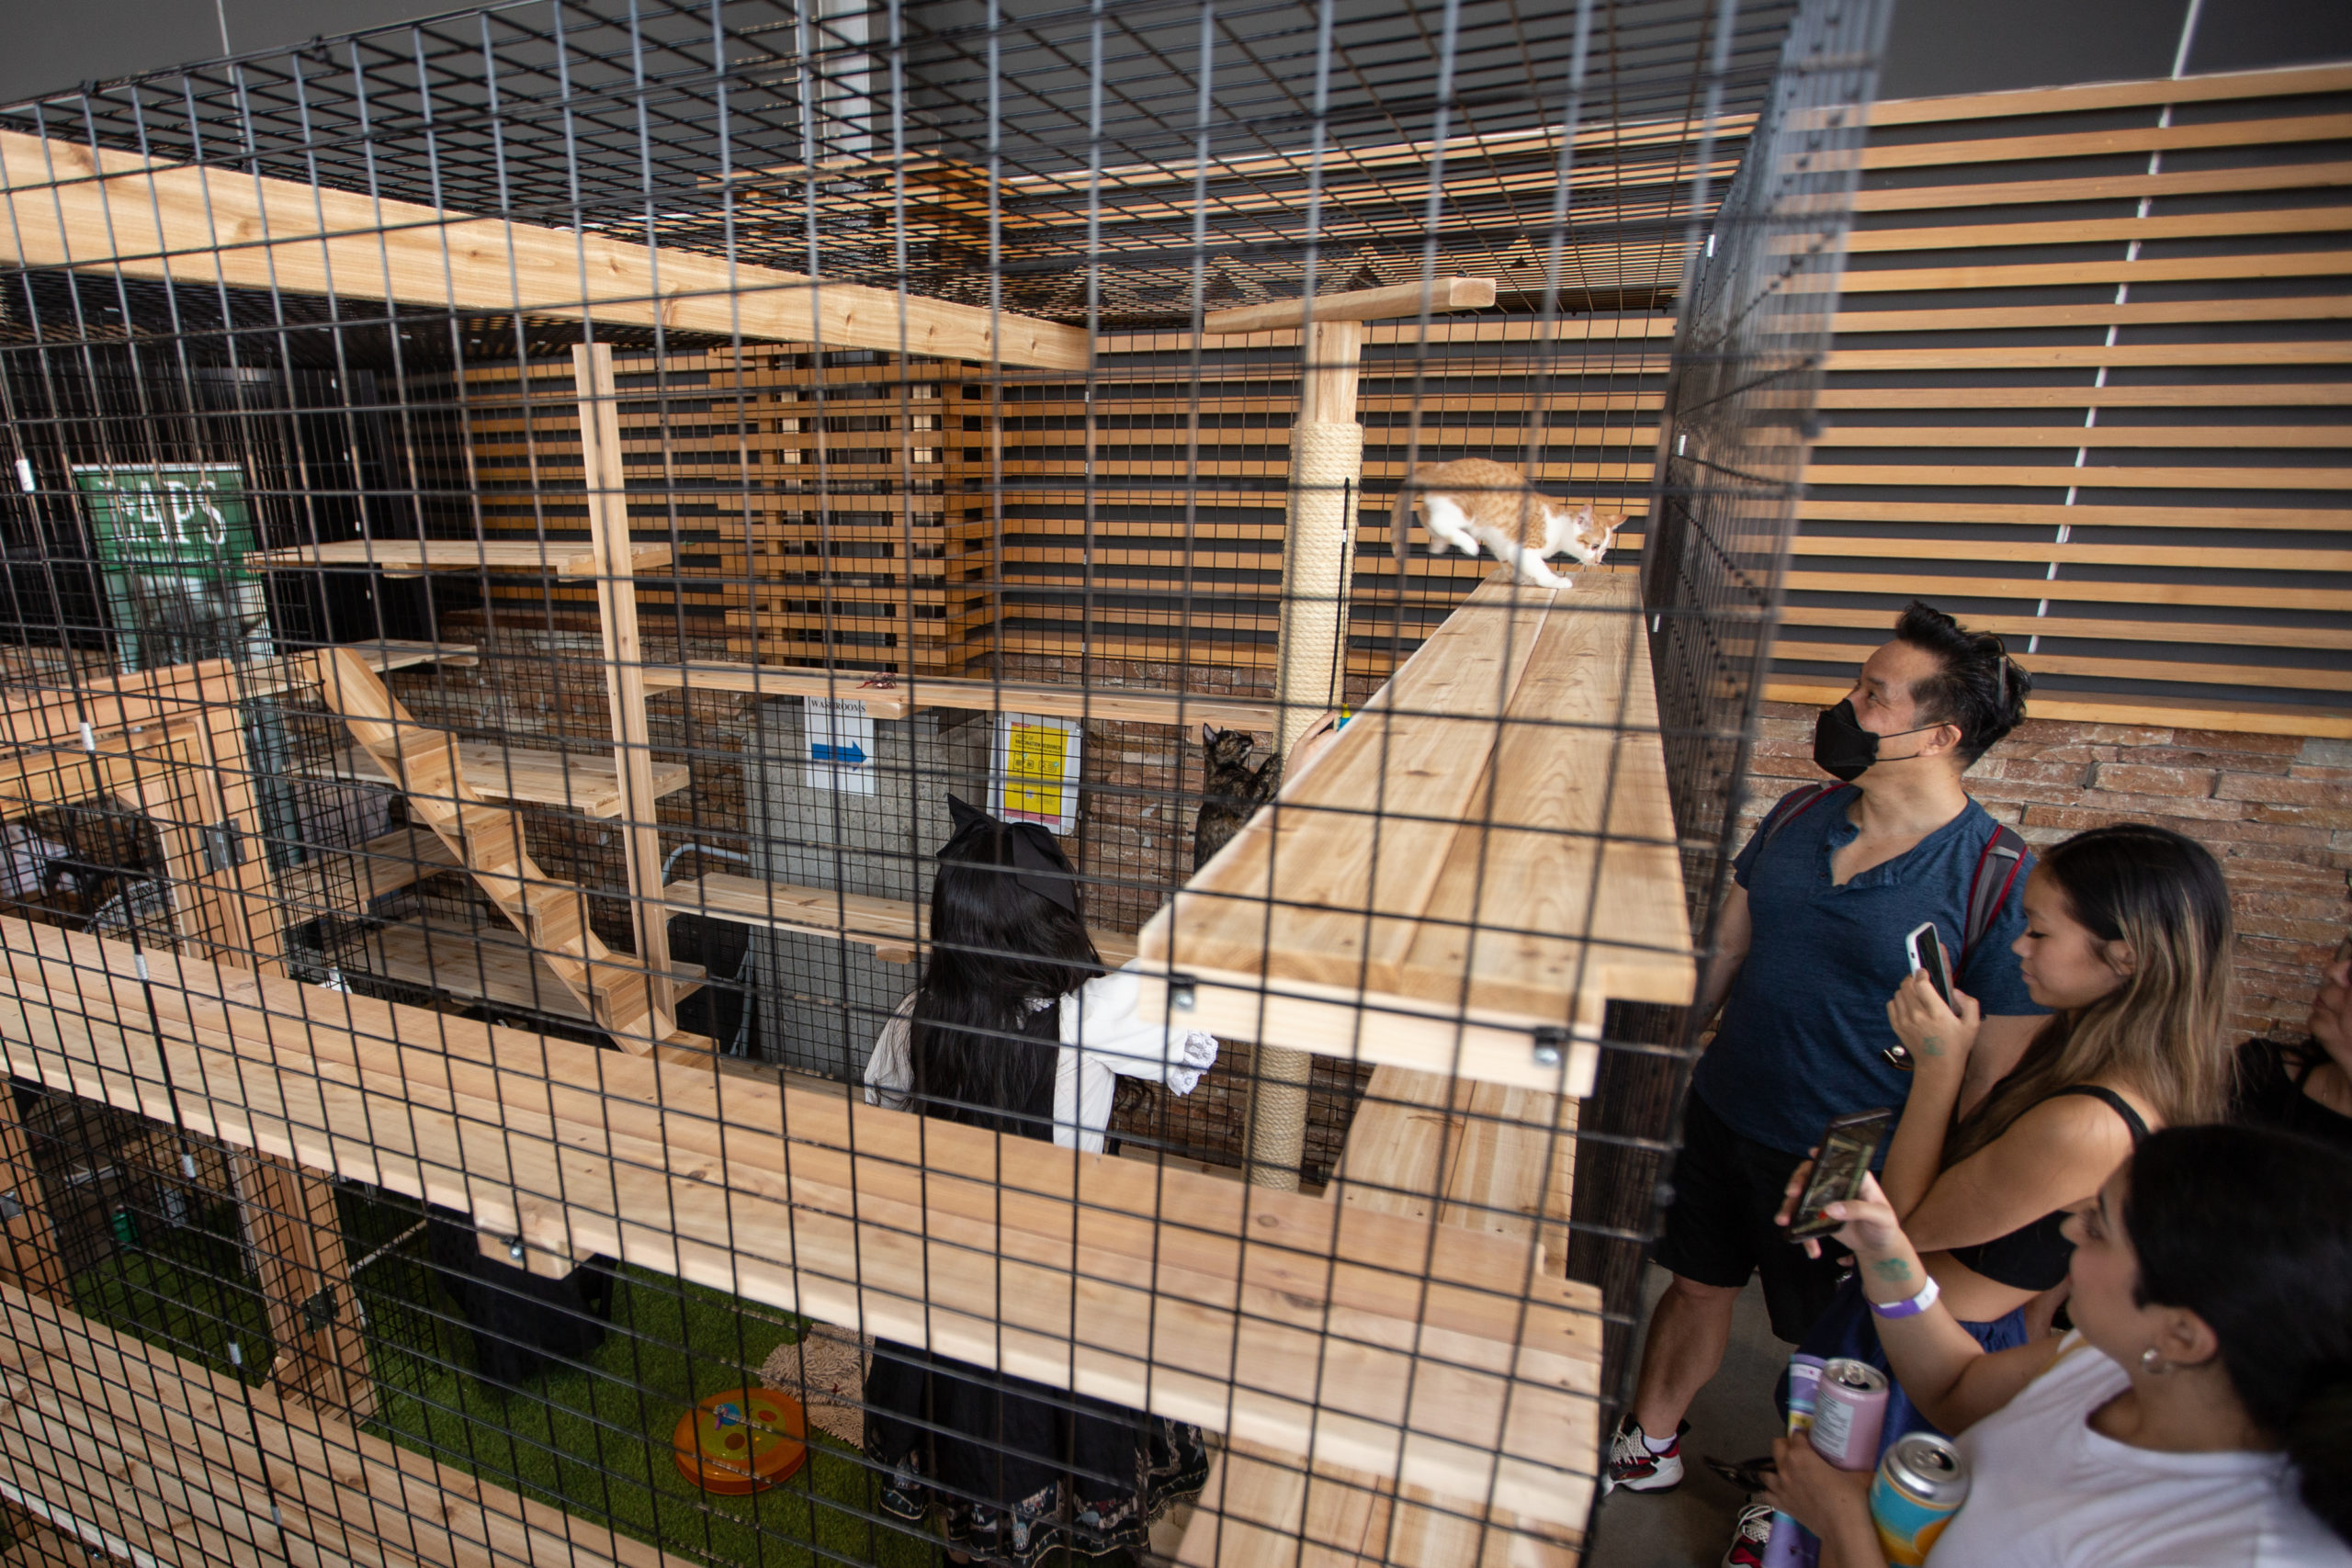 A kitten leaps to a platform in a walk-in petting cage at Meowfest 2022